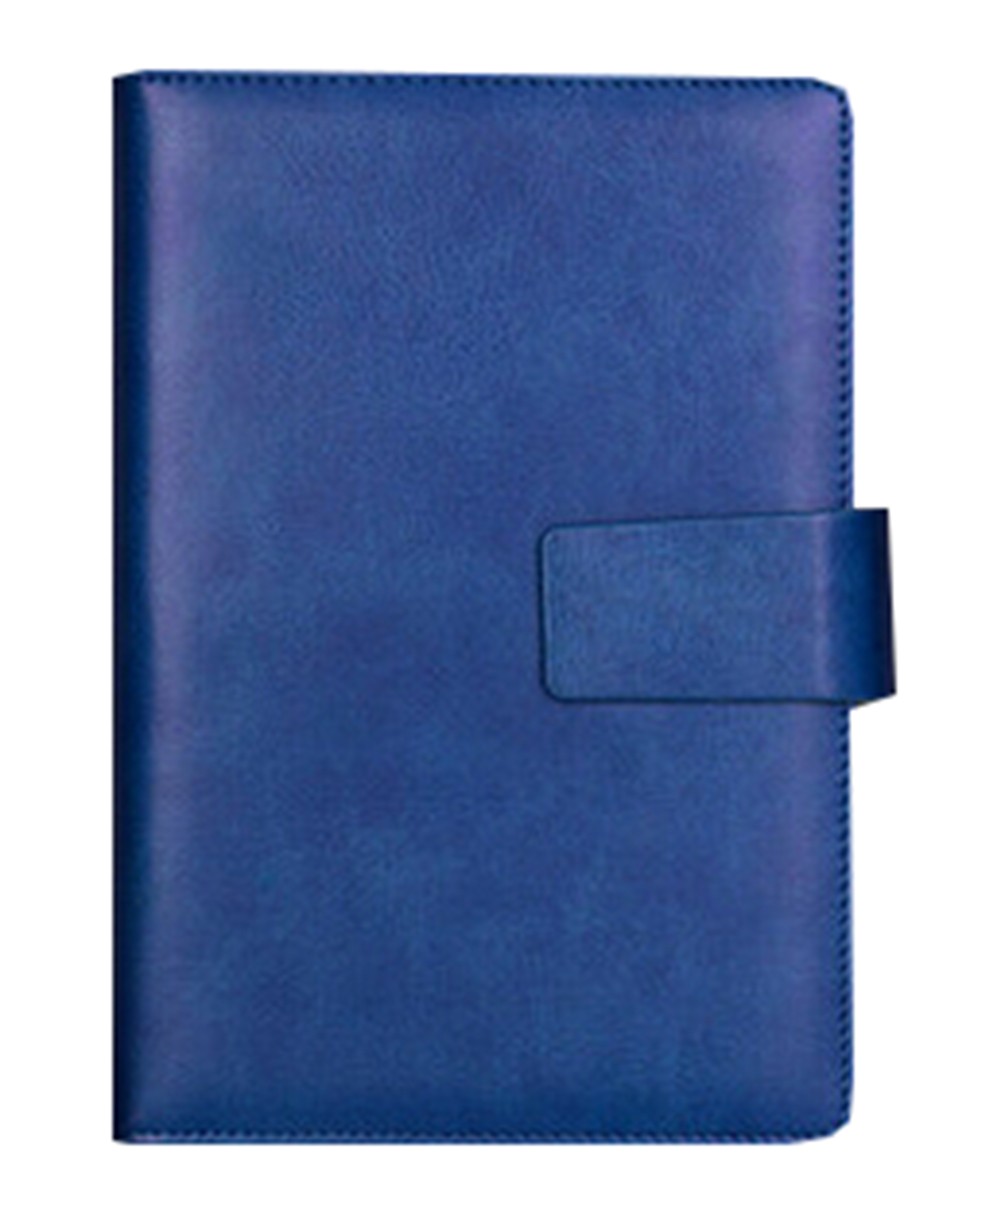 Simple Classic Notepad Leather Cover Notebook Business Office Stationery, BLUE